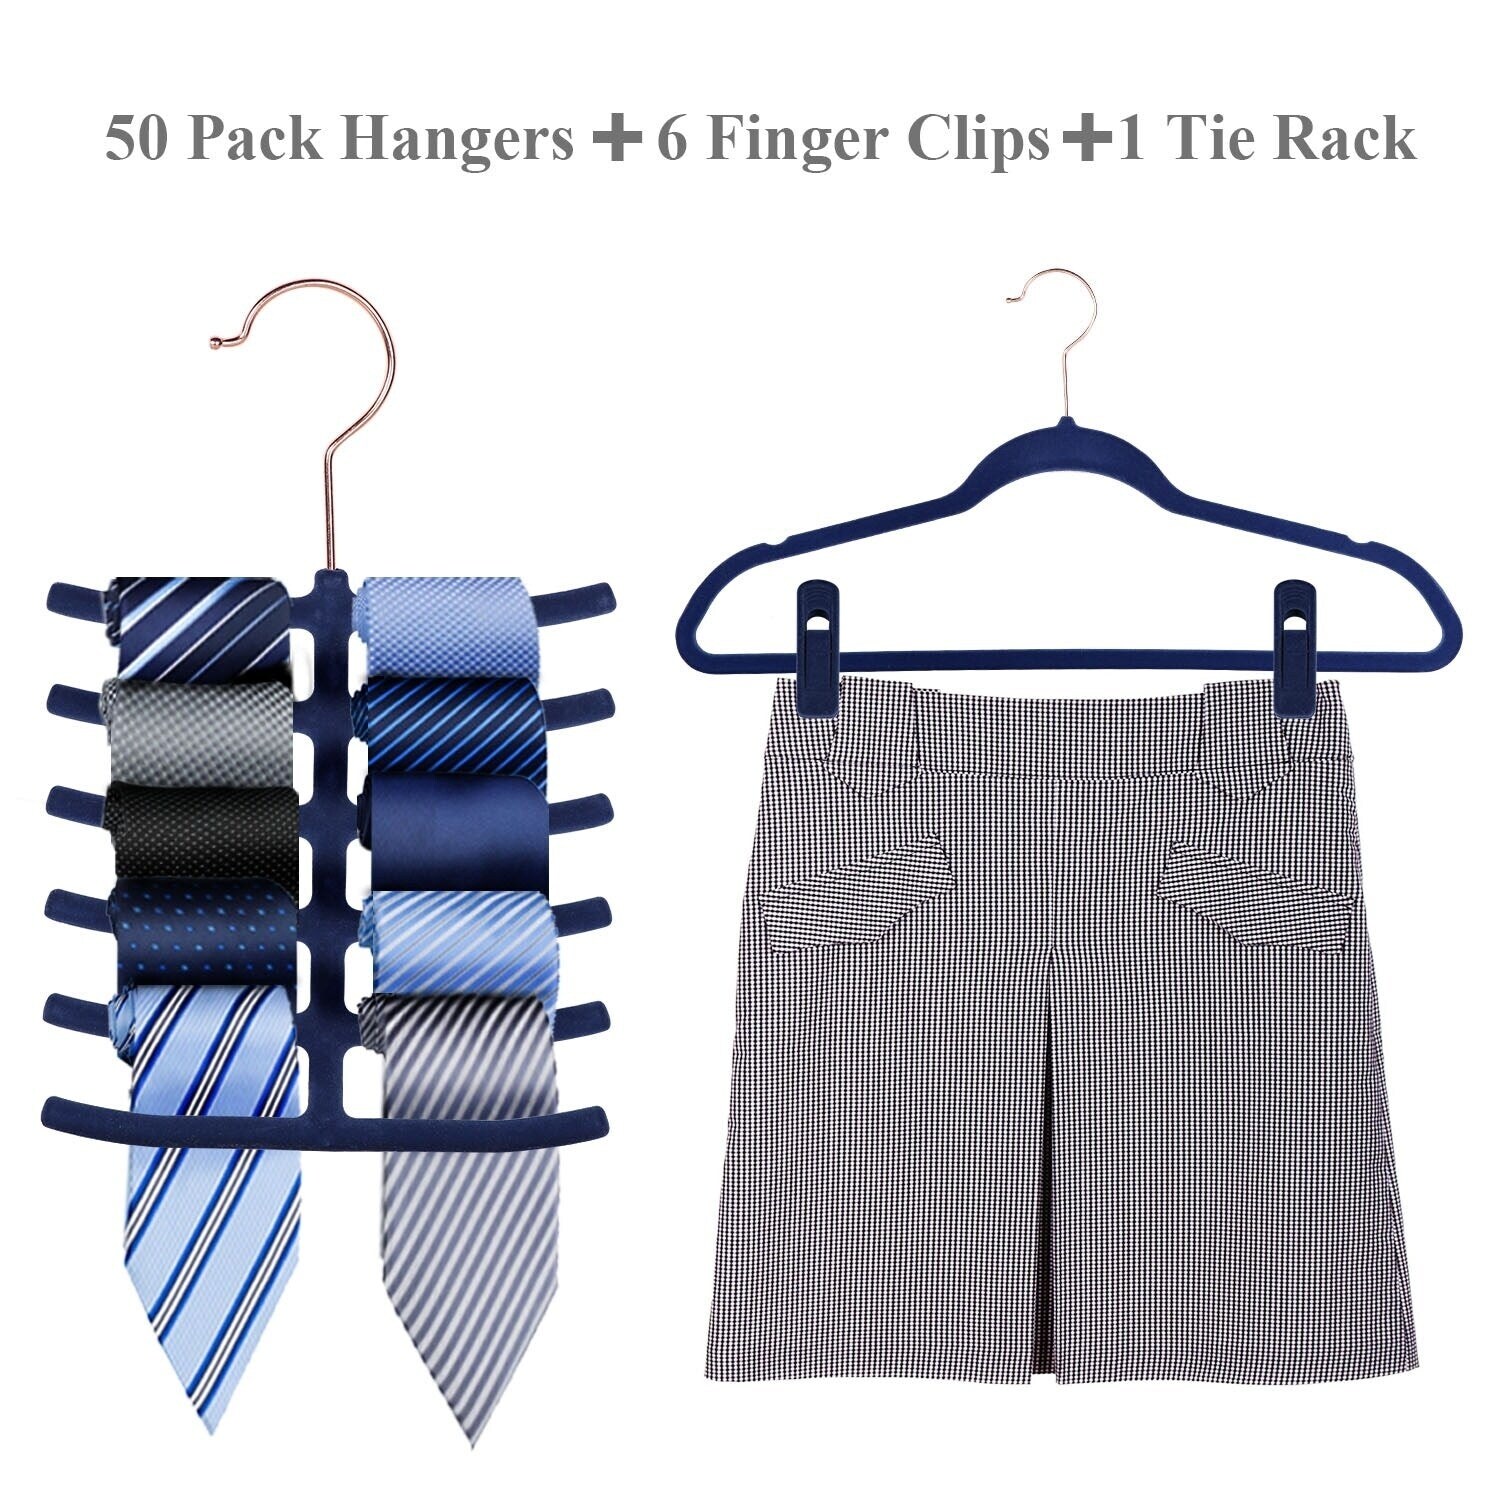 https://ak1.ostkcdn.com/images/products/is/images/direct/d80a799a99cb3f622fd6d05a52fe7cefae1b621b/Hanger-Sets-Heavy-Duty-Velvet-Hangers-50-Pack-Non-Slip-%26Ultra-Thin%2C-Six-Colors-Option.jpg